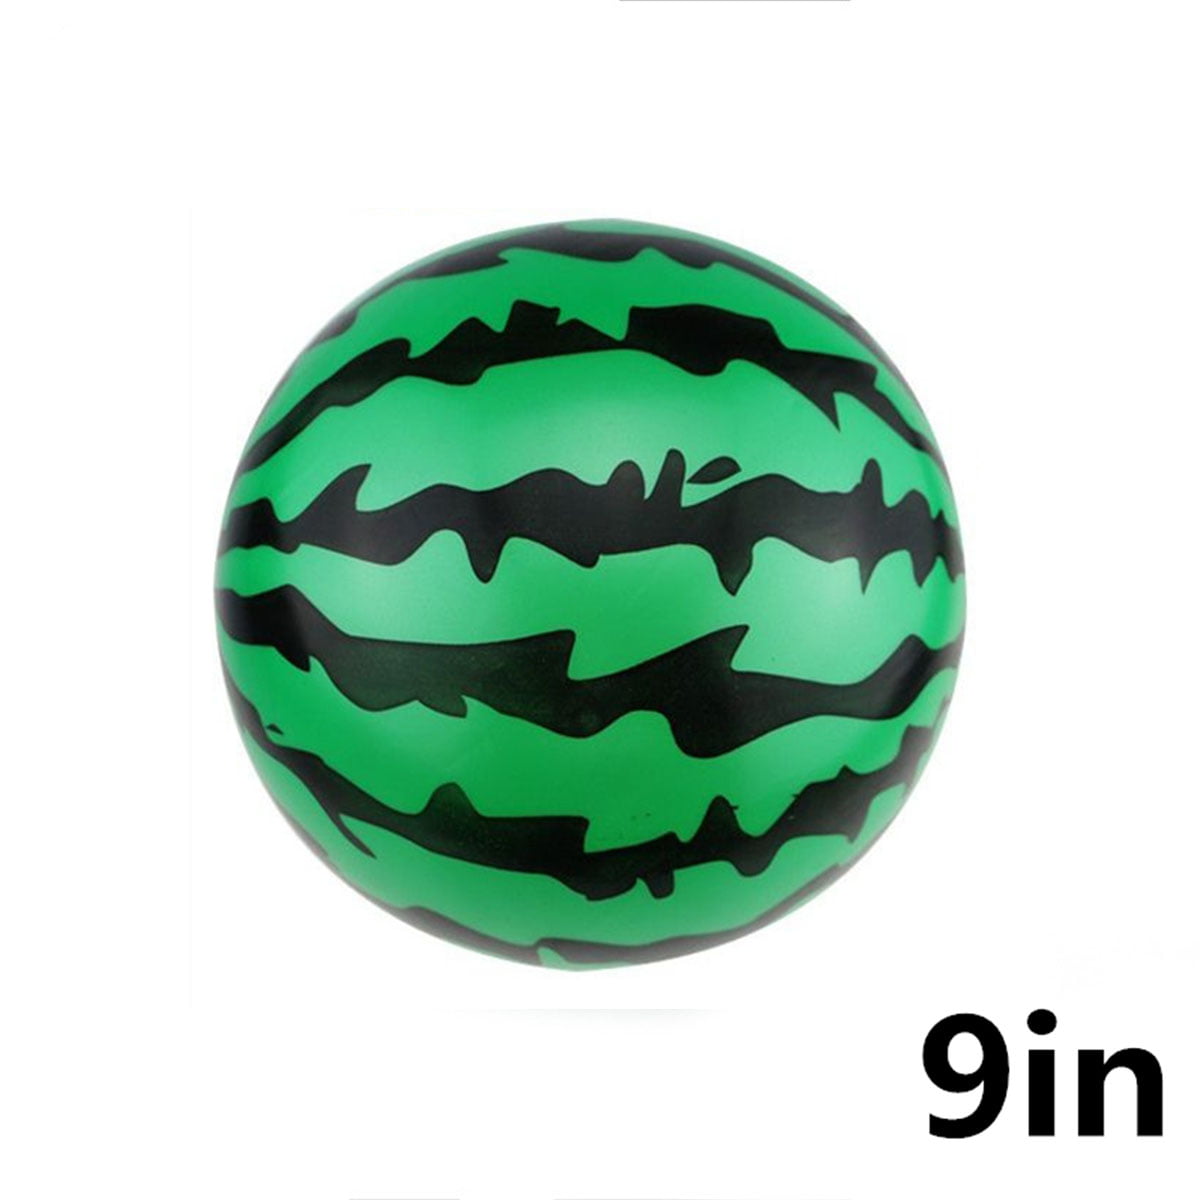 Watermelon Face Kids Inflatable Blow-up Ball Beach Pool Toy 8.66" Green 